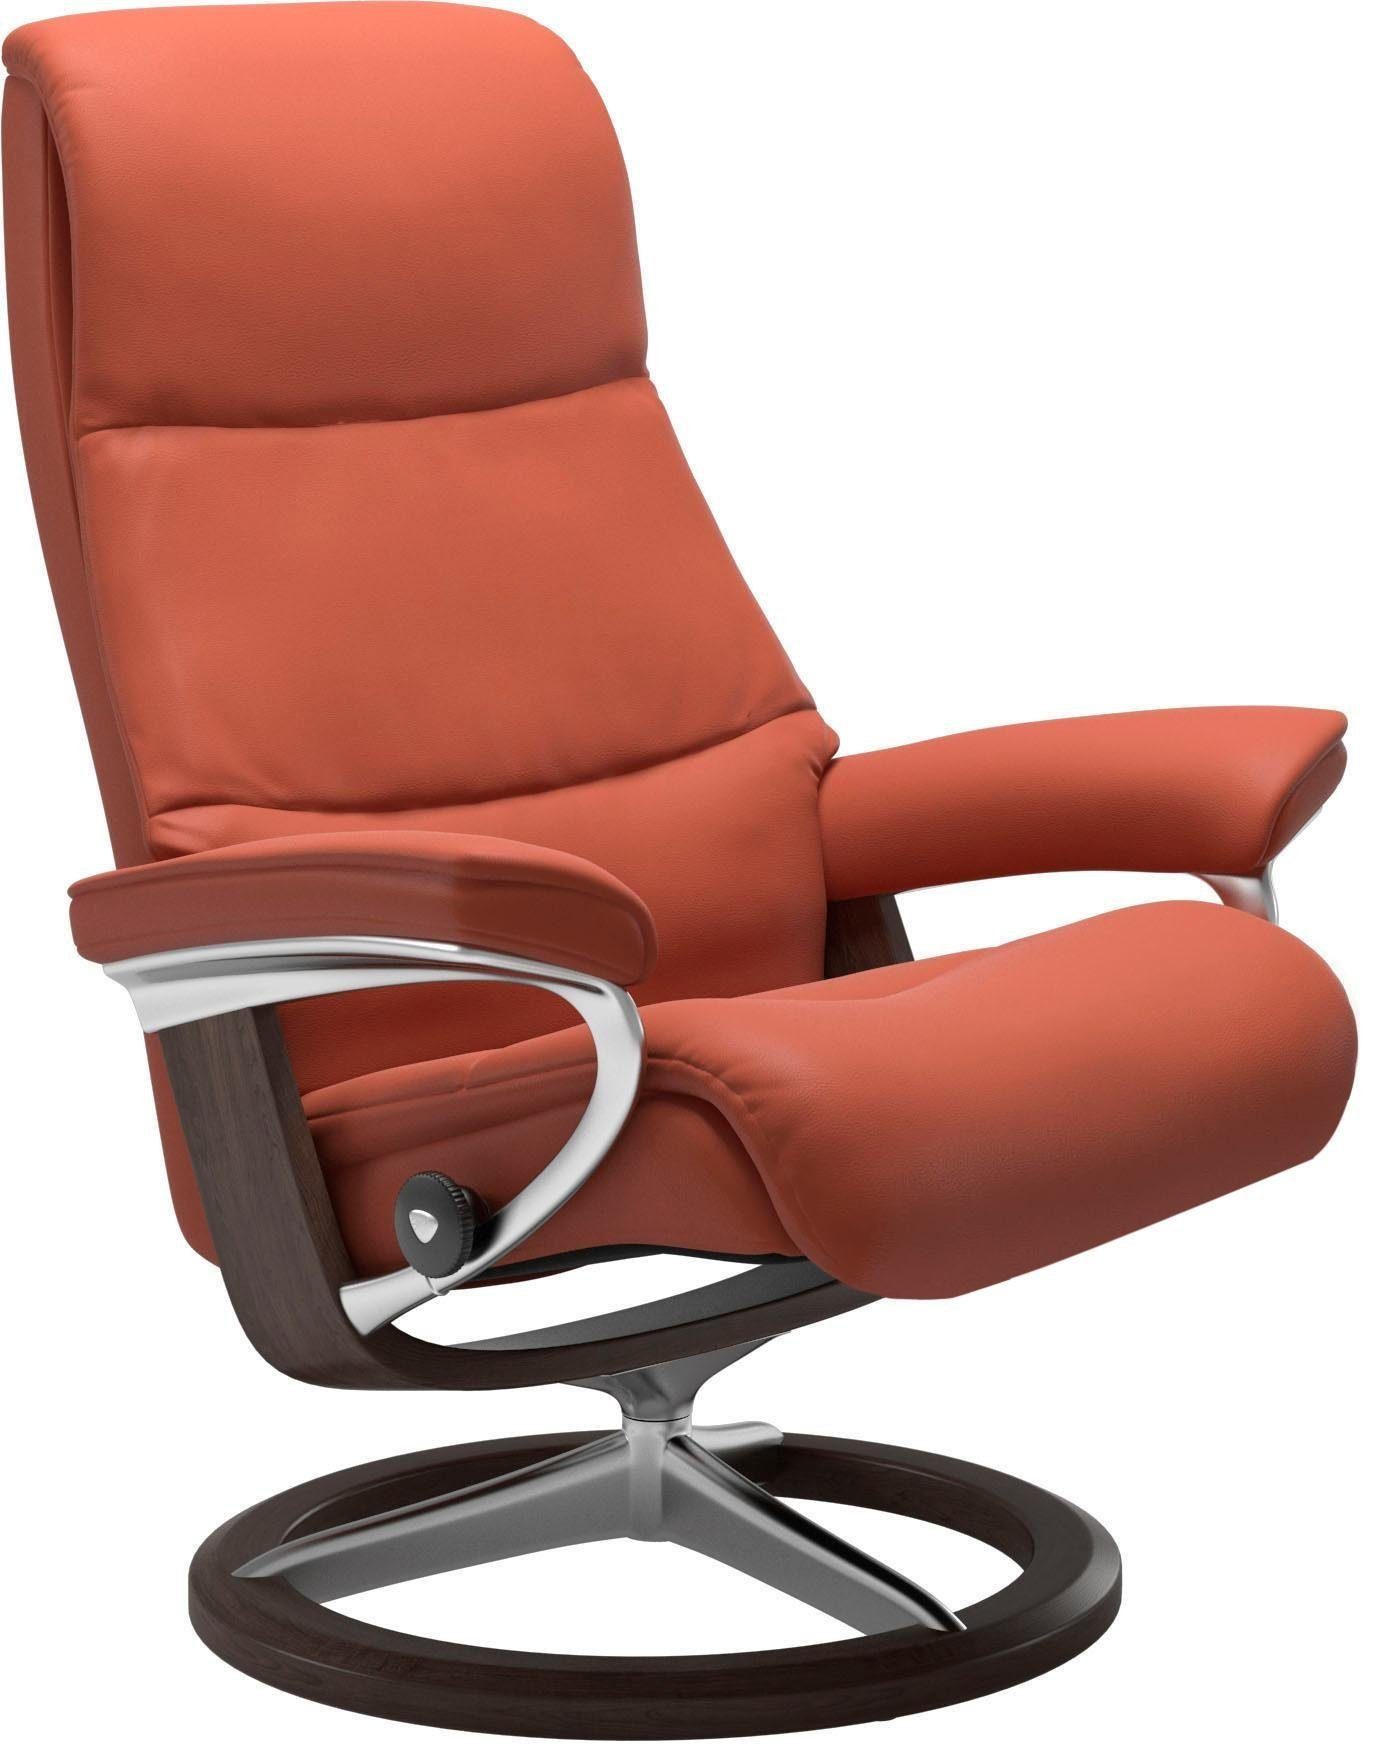 Stressless® Relaxsessel View, mit Signature S,Gestell Größe Base, Wenge